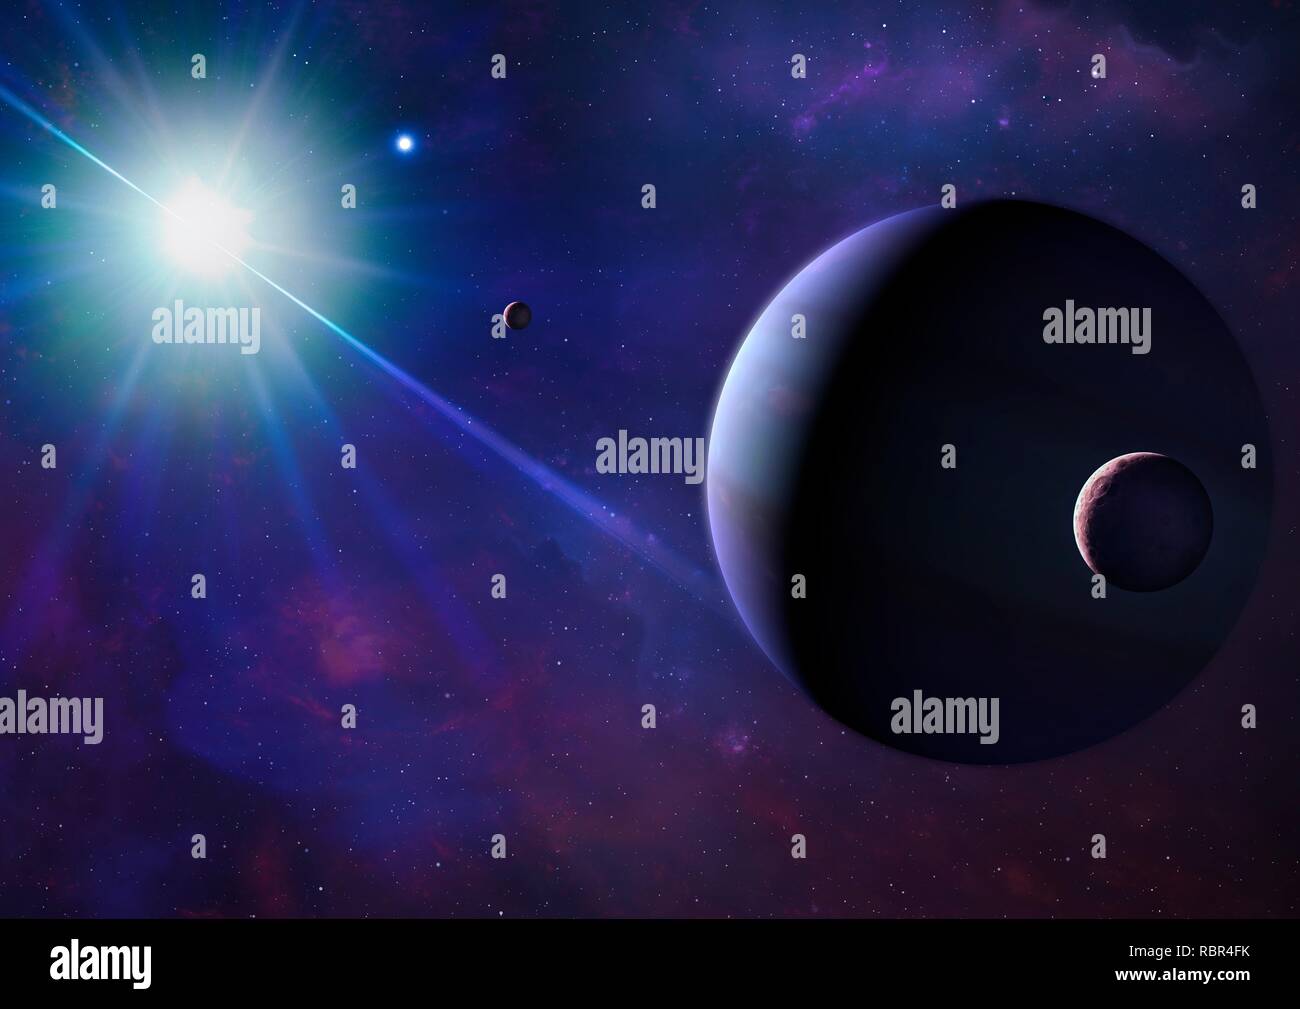 Illustration of a planet and its moon orbiting a pulsar. Pulsars are very rapidly spinning neutron stars the dead cores of massive stars rotating on their axes often hundreds of times every second. Radio and optical beams of radiation, emitted from the pulsar's magnetic poles, flash across our line of sight and the star appears to blink on and off as it spins. At least one pulsar (PSR J1719-1438) is known to host an extrasolar planet. In fact this planet, which is made of solid diamond, was the first extrasolar planet ever found. Methuselah's planet, orbiting PSR B1620-26, is another example Stock Photo